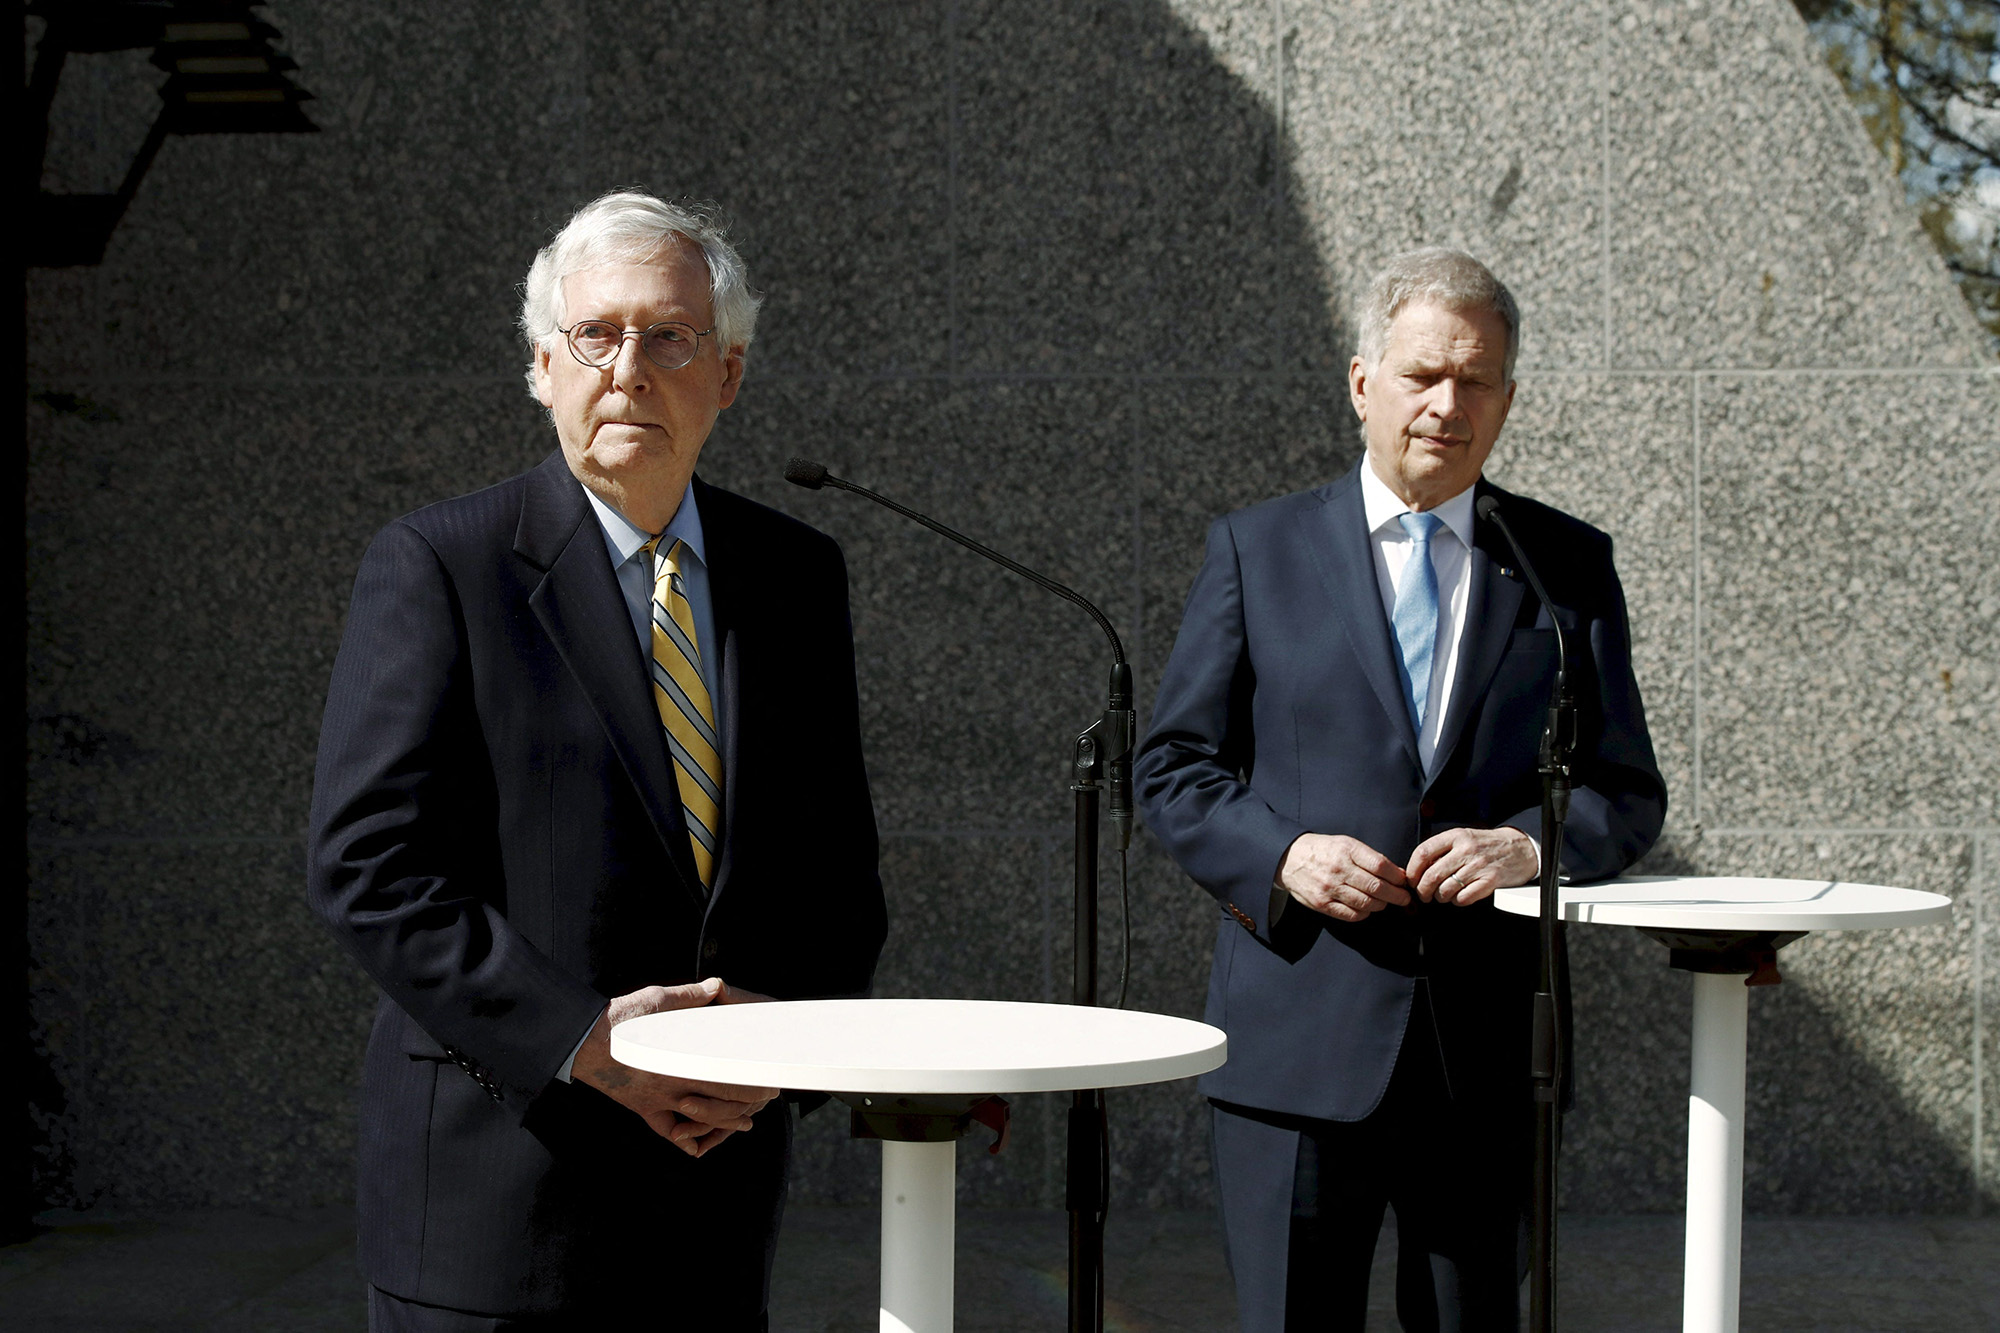 US Senate Minority Leader Mitch McConnell, left, and President of Finland Sauli Niinistö, right, speak to the press after their meeting at the President's official residence Mantyniemi in Helsinki, Finland, on May 16, 